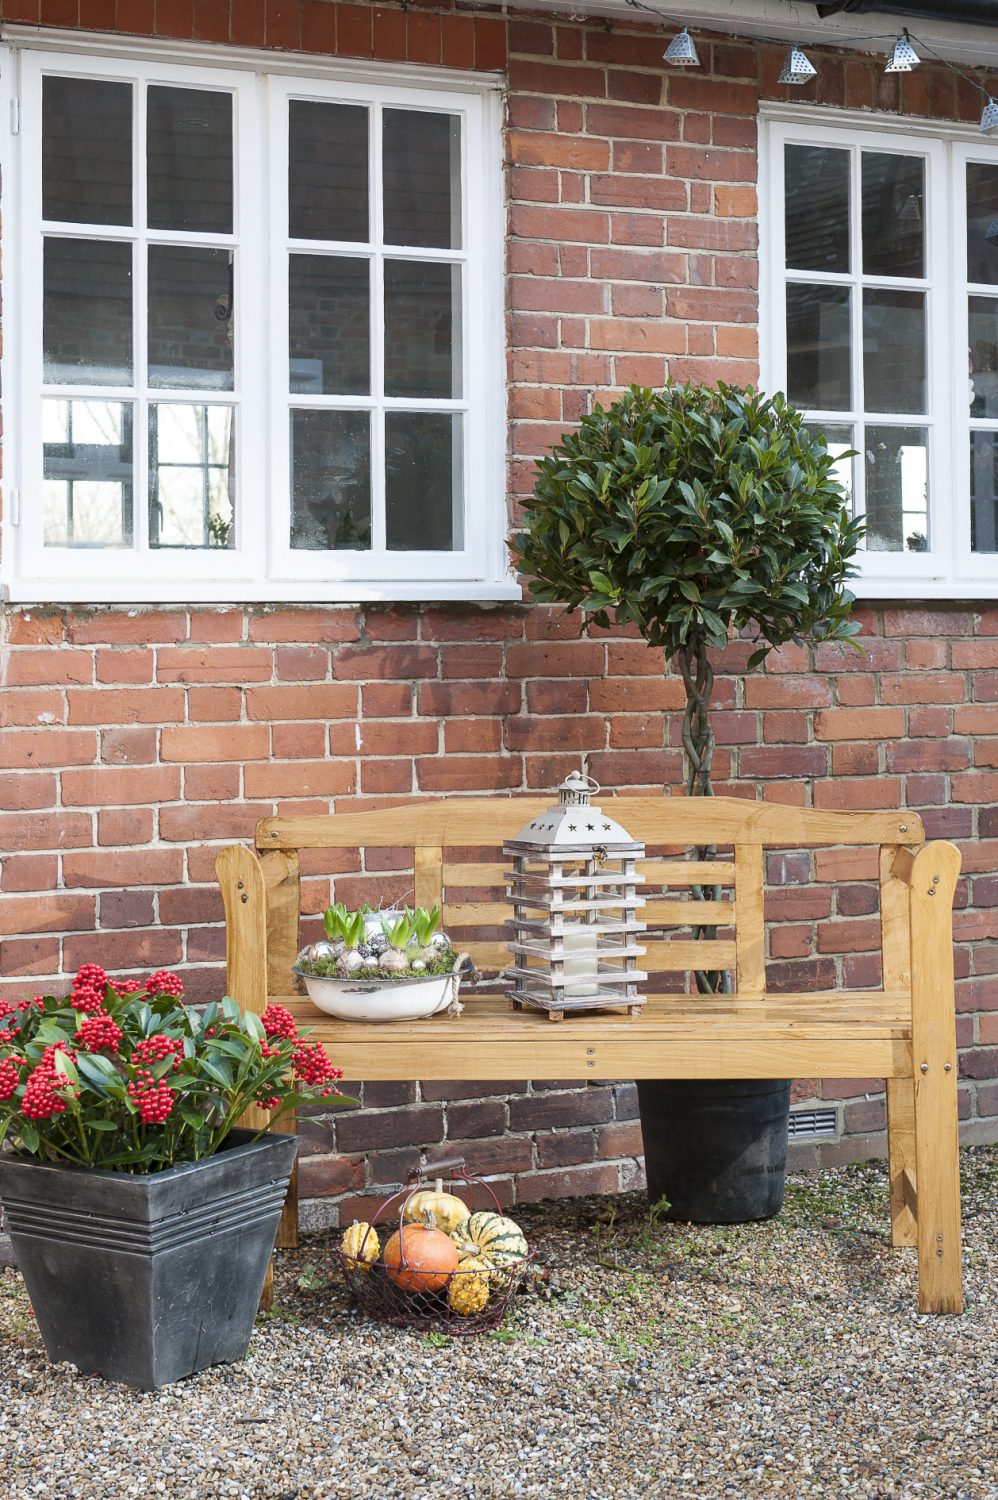 The shared courtyard is a lovely sheltered space in which to relax